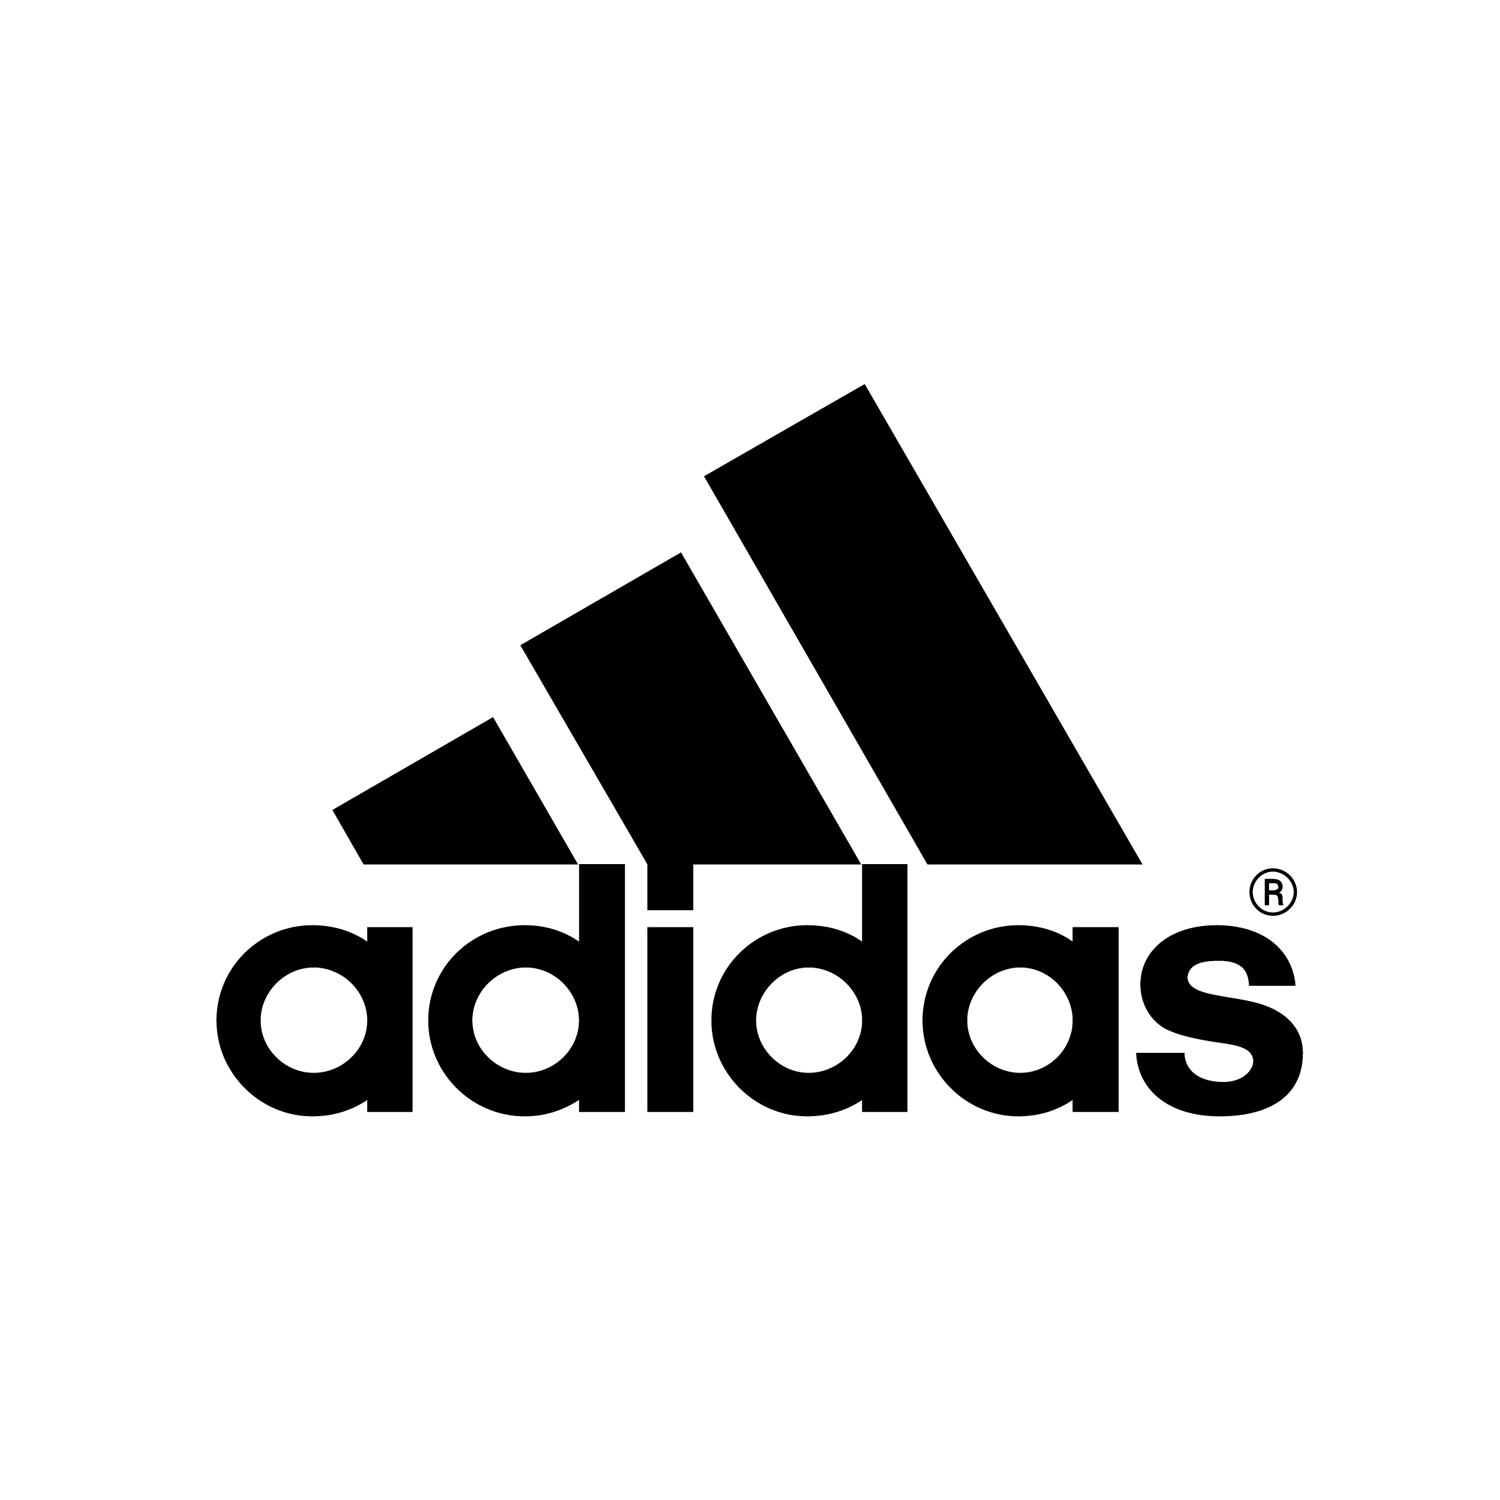 Free download Adidas Wallpaper 2017 2018 Best Cars Reviews [1500x1500] for your Desktop, Mobile & Tablet | Explore 98+ Adidas Logo Wallpaper 2017 | Adidas Logo Wallpaper, Adidas Logo Wallpaper 2015, Wallpaper Logo Adidas